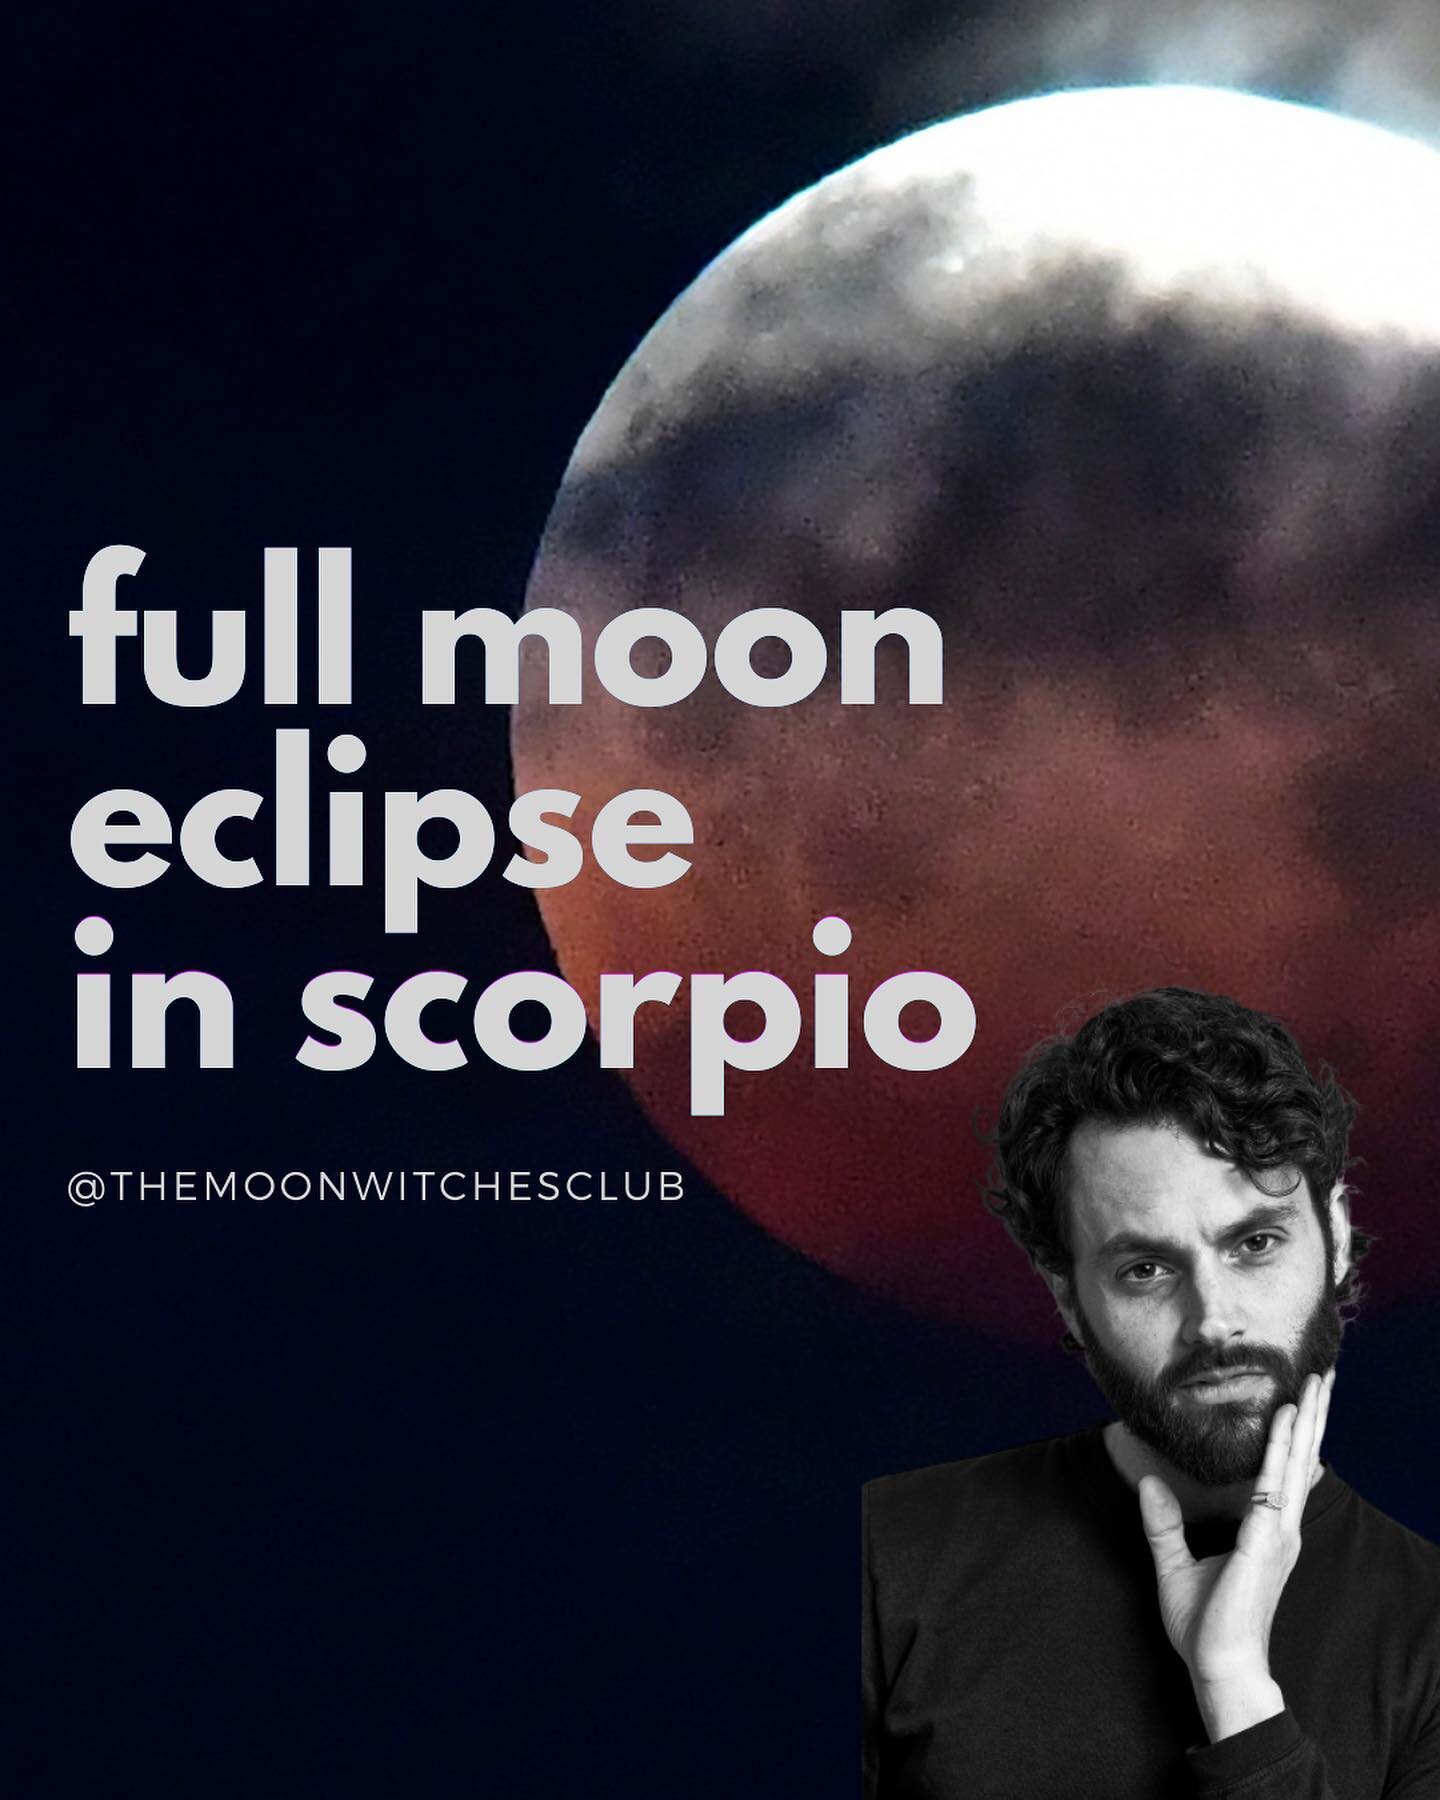 FULL MOON PENUMBRAL LUNAR ECLIPSE @ 14' Scorpio
Friday 5th May, 17:24 GMT

This is a deep, emotional, intense lunation. This eclipse could bring revelations, accelerated change, transformation. But do not fear it. This is the last eclipse of the Sout